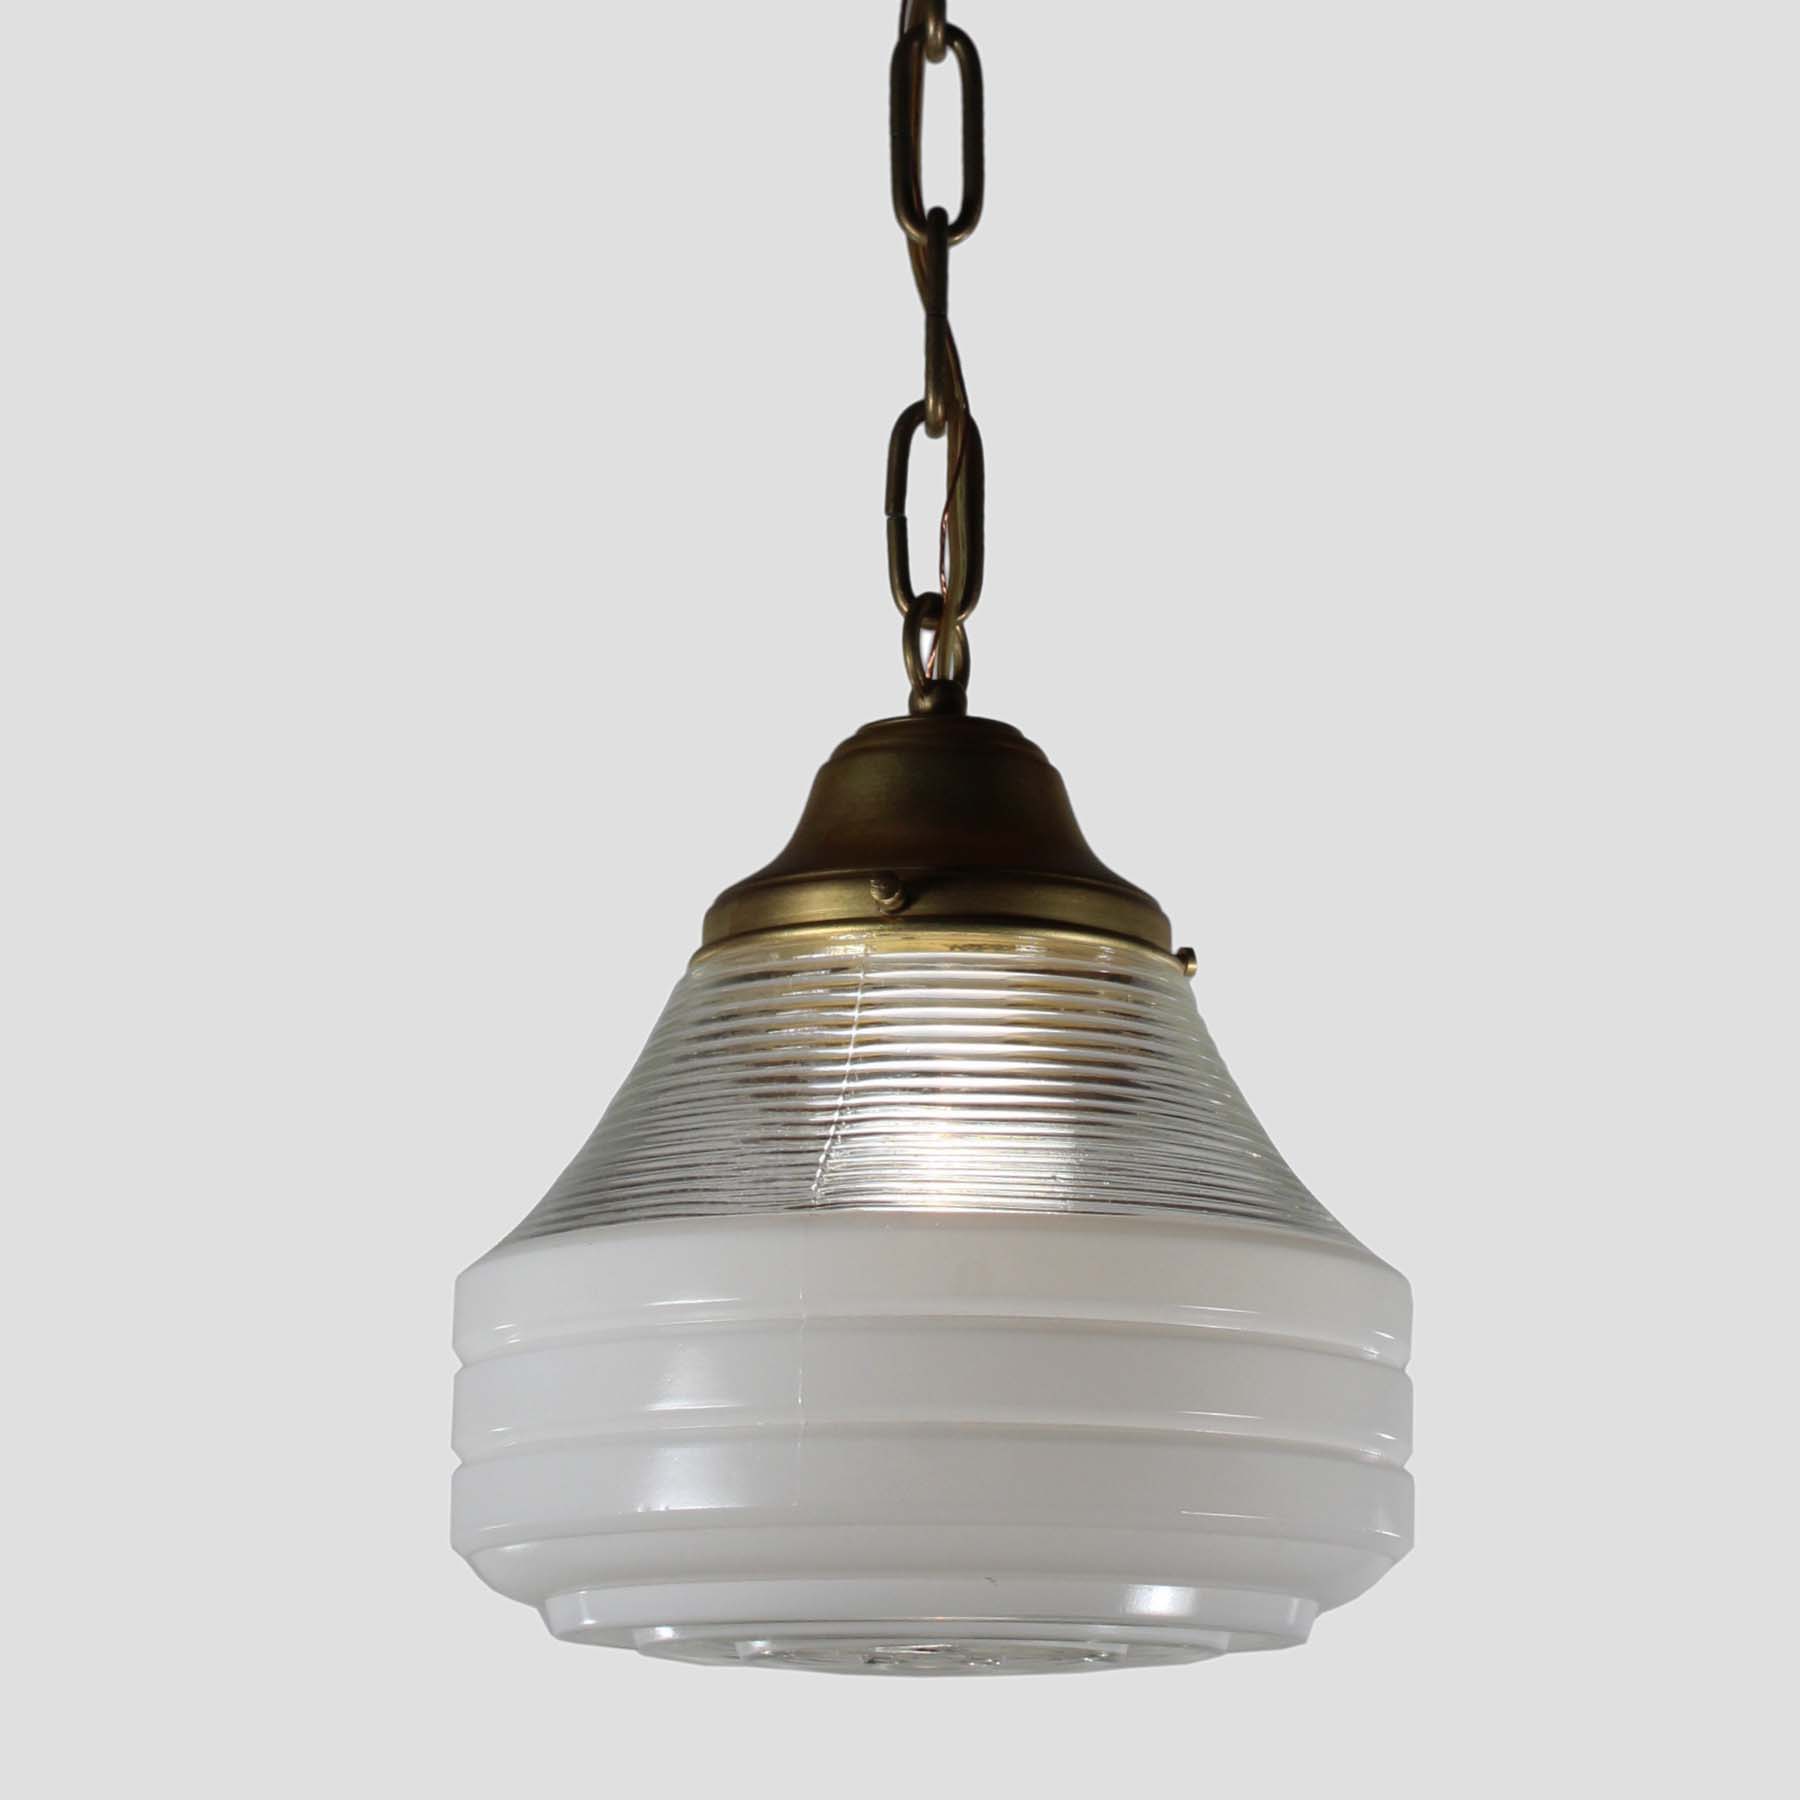 SOLD Antique Brass Pendant Lights with Original Shades-71167